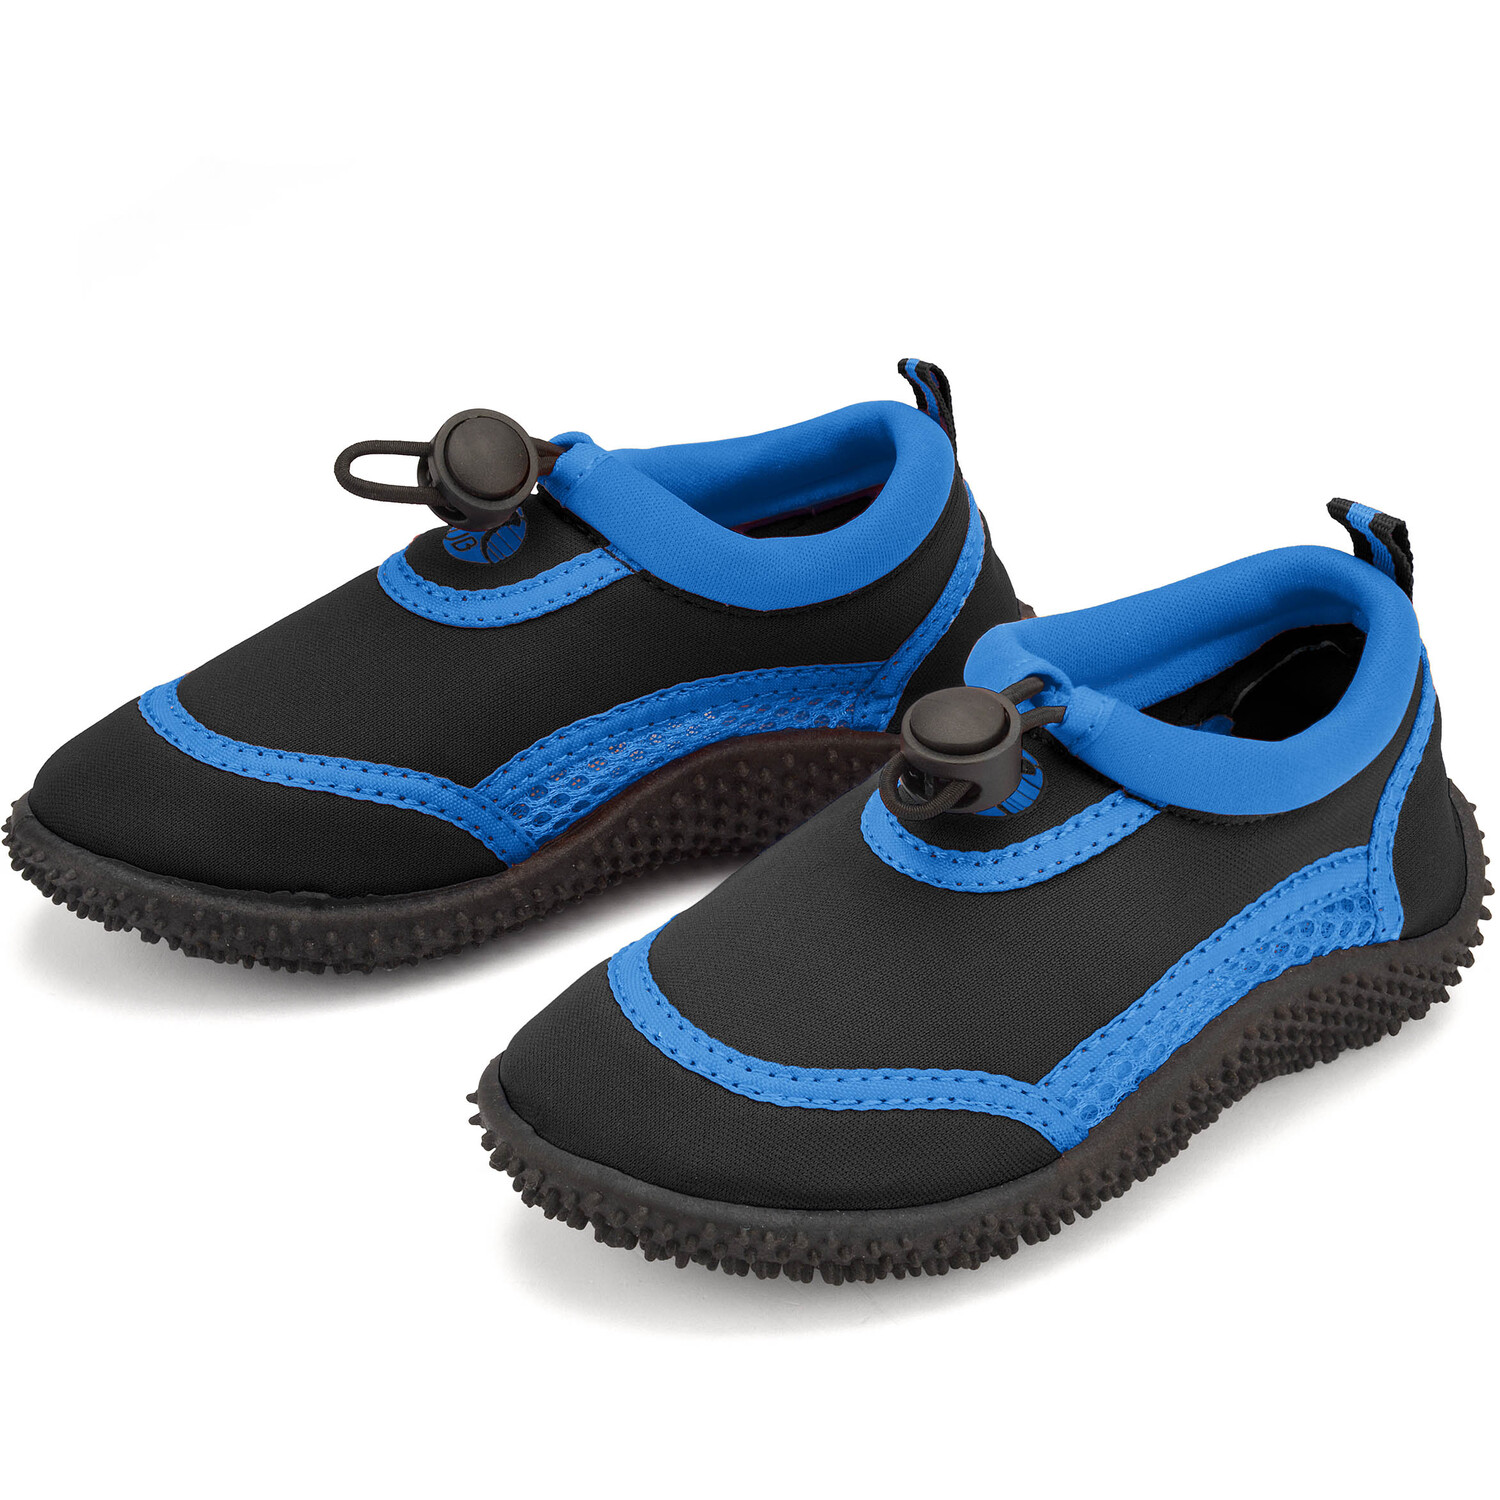 Toggle Infants Water Shoes - Blue Image 2